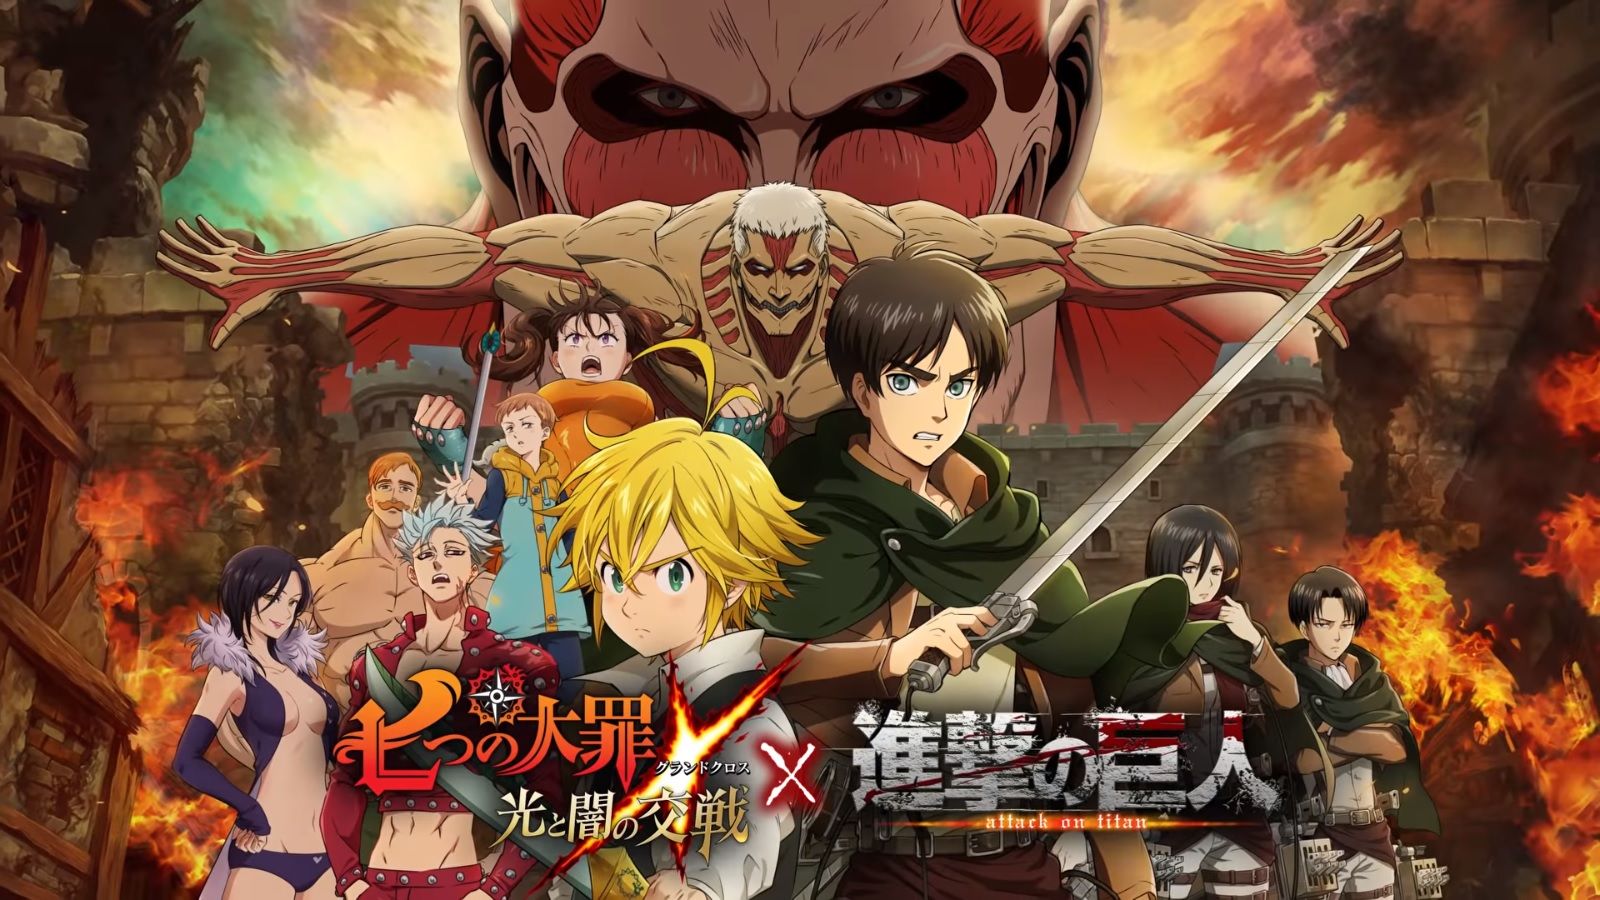 Crunchyroll  The Seven Deadly Sins Four Knights of the Apocalypse Anime  Shares 2nd Teaser Visual